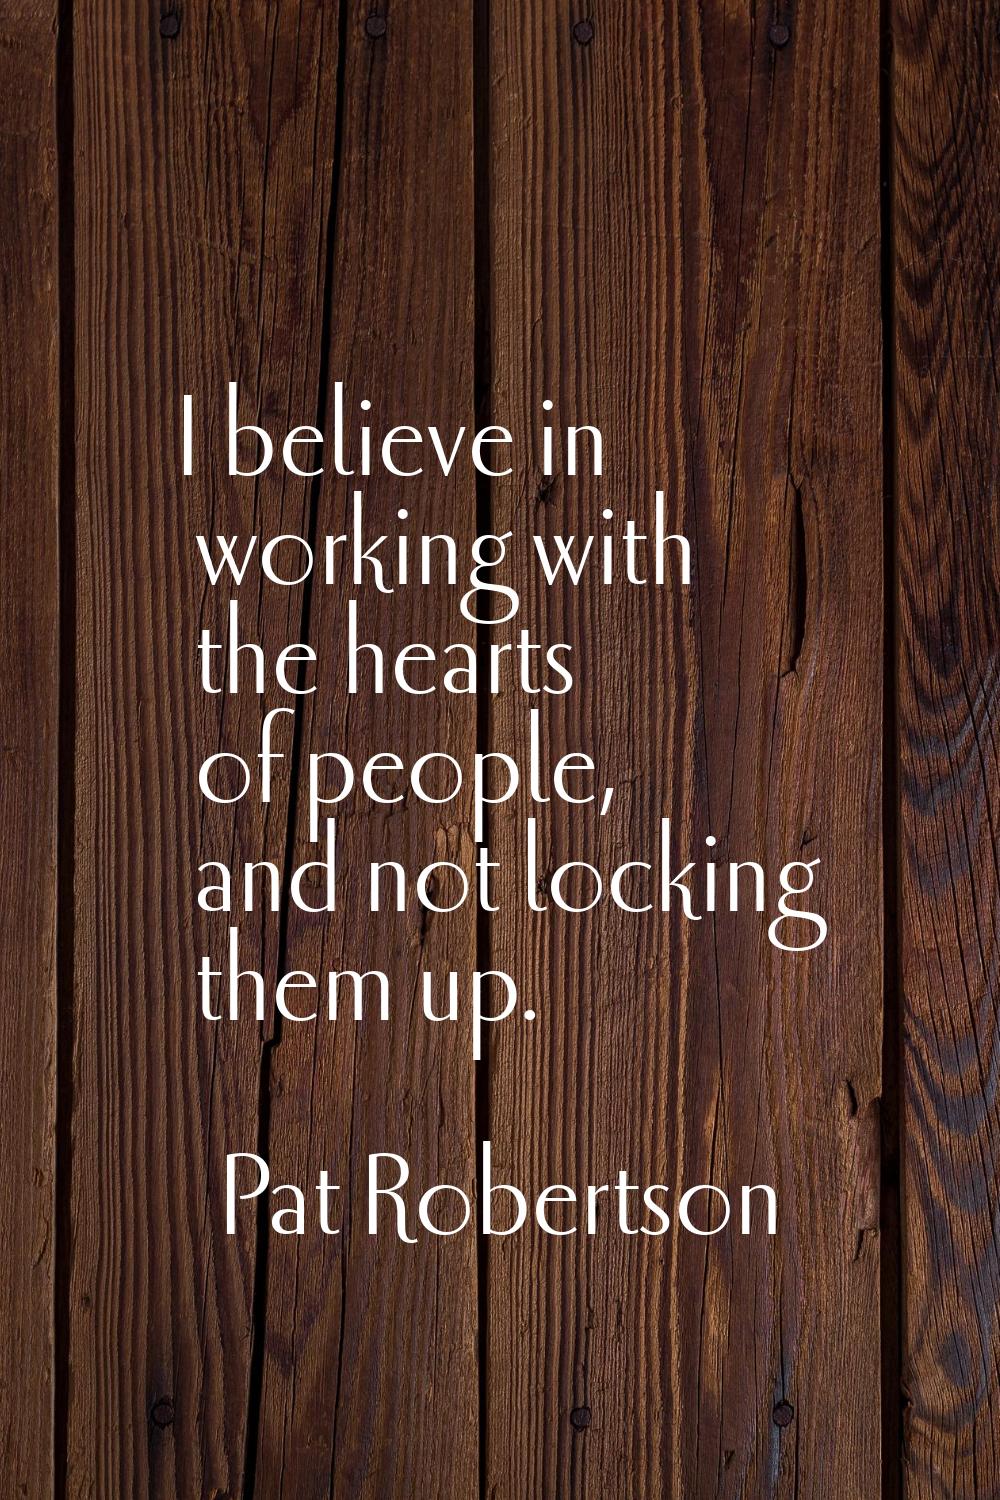 I believe in working with the hearts of people, and not locking them up.